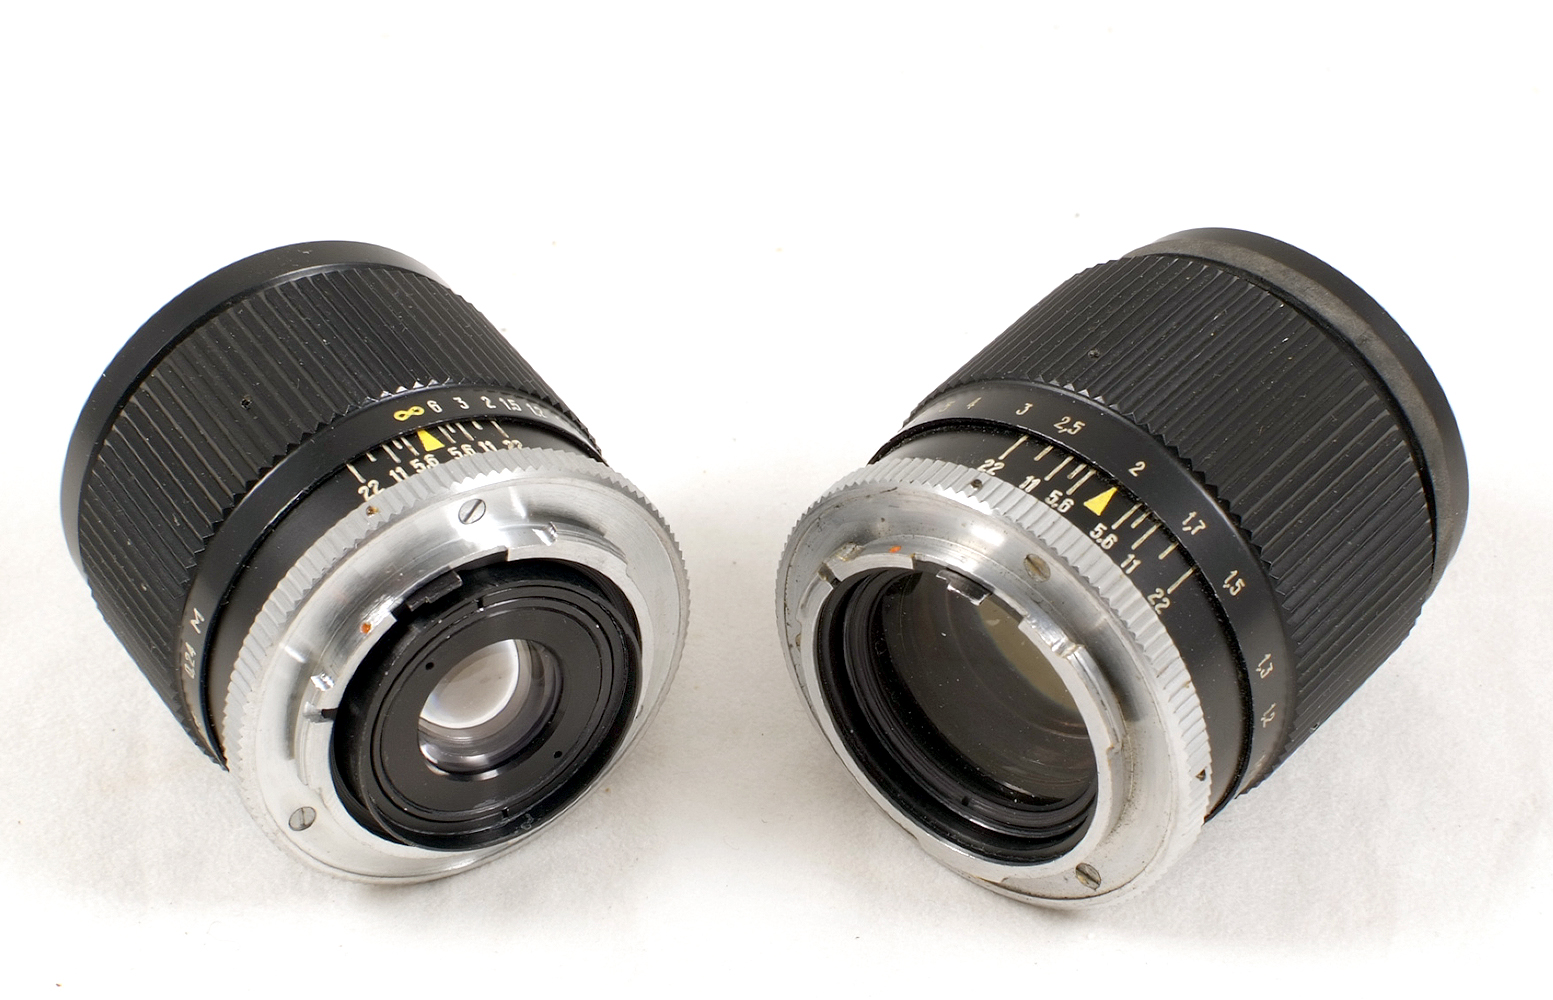 Pair of Lenses for Kiev-10 & 15 Cameras. JUPITER-9 AUTOMAT f2 85mm lens c1979, with cap & keeper. - Image 2 of 3